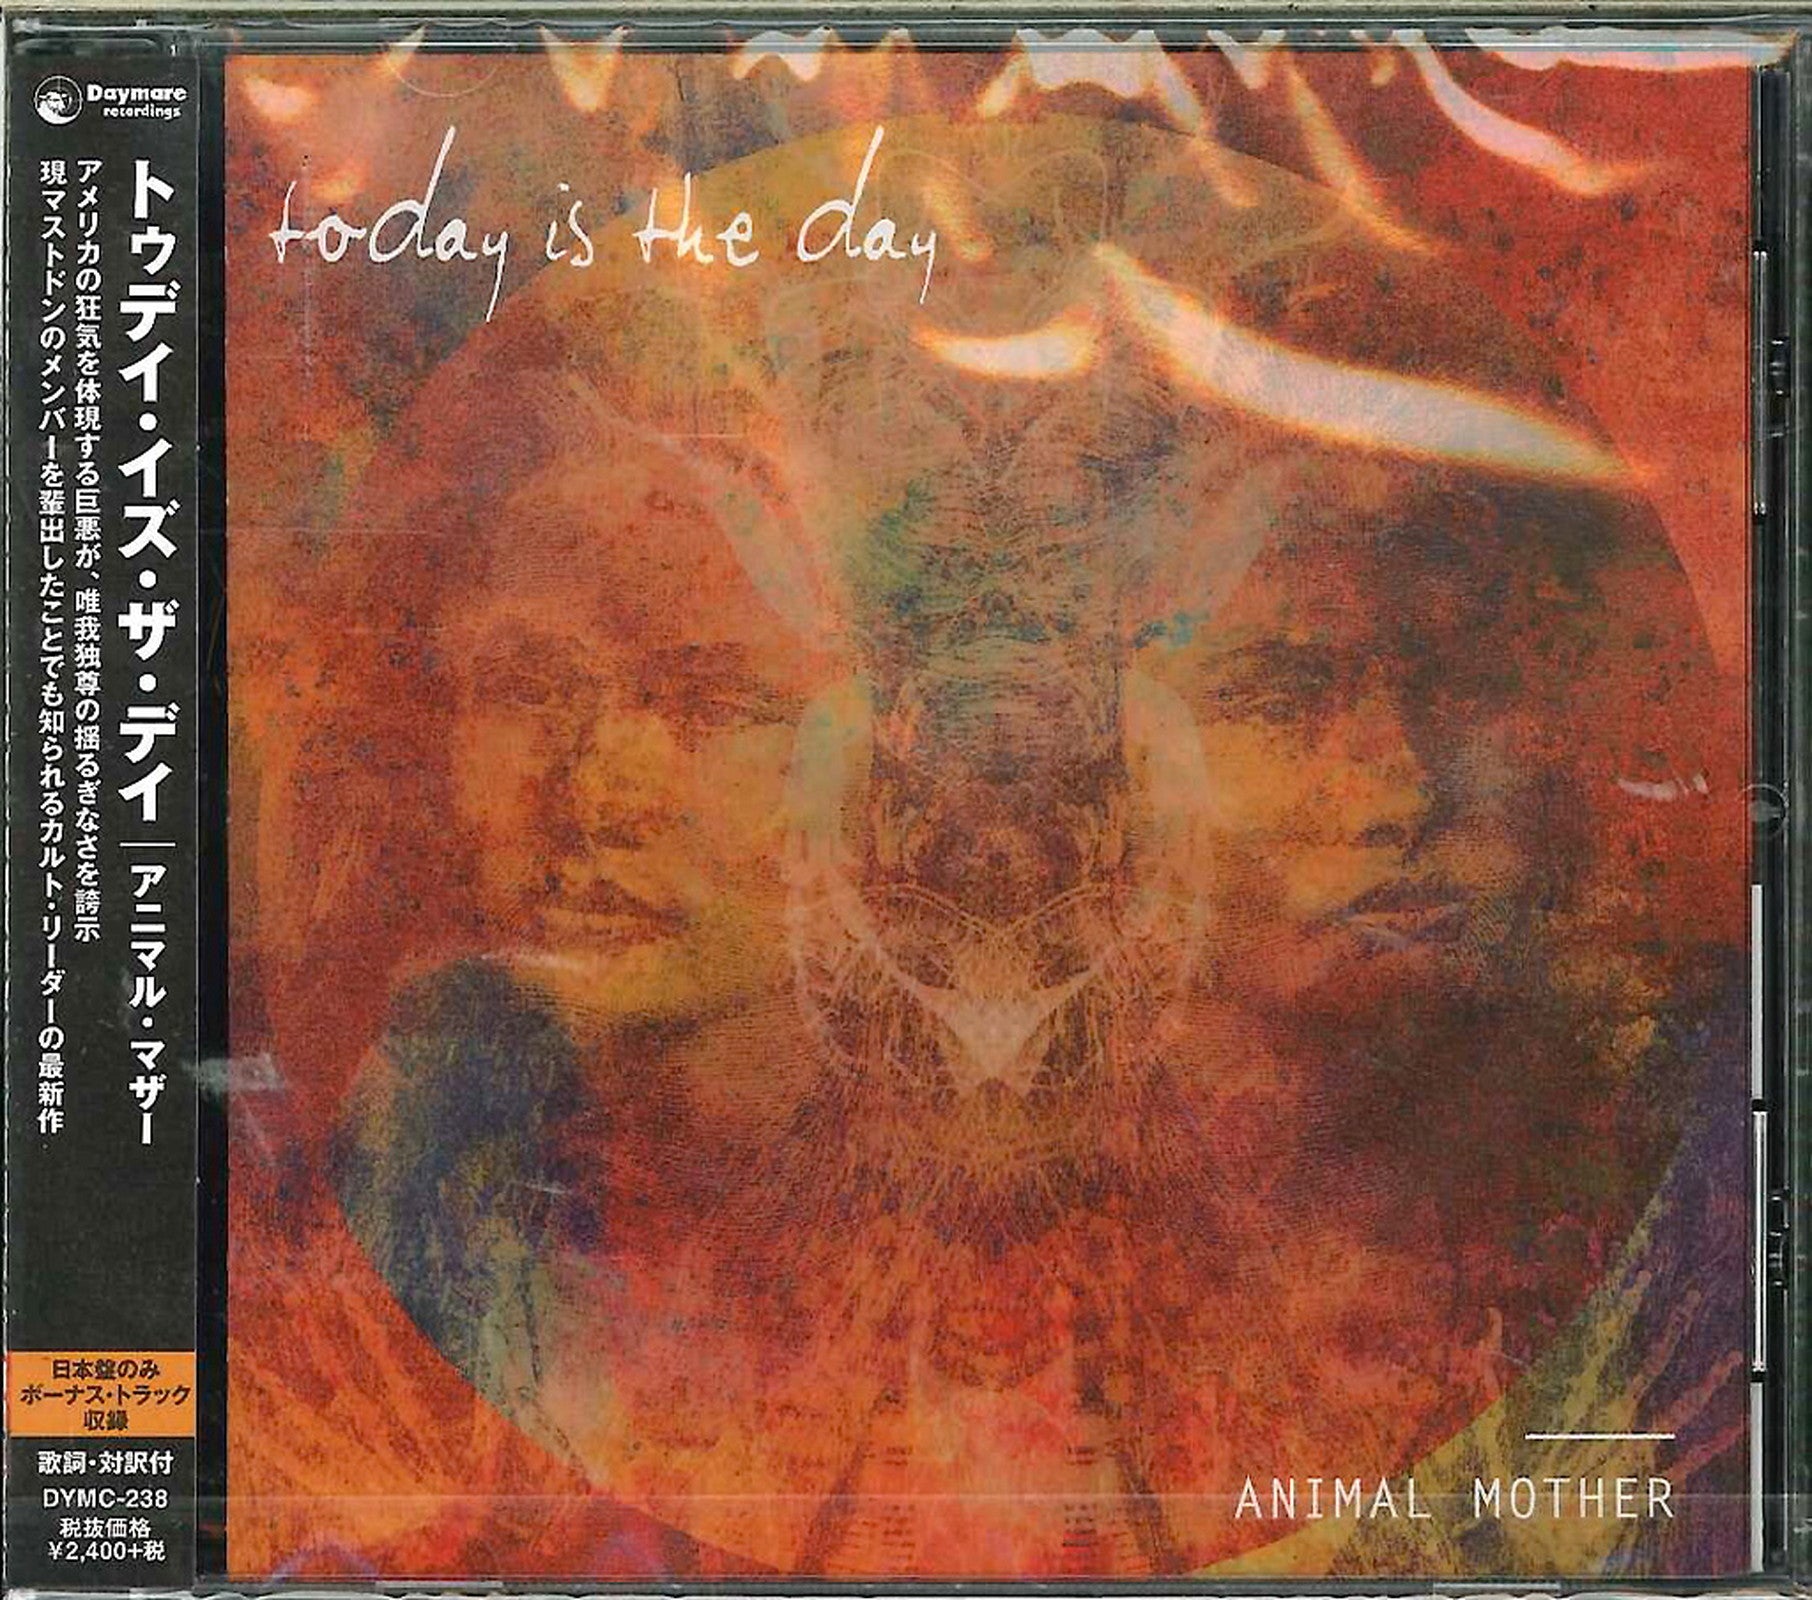 Today Is The Day - Animal Mother - Japan CD – CDs Vinyl Japan Store 2014